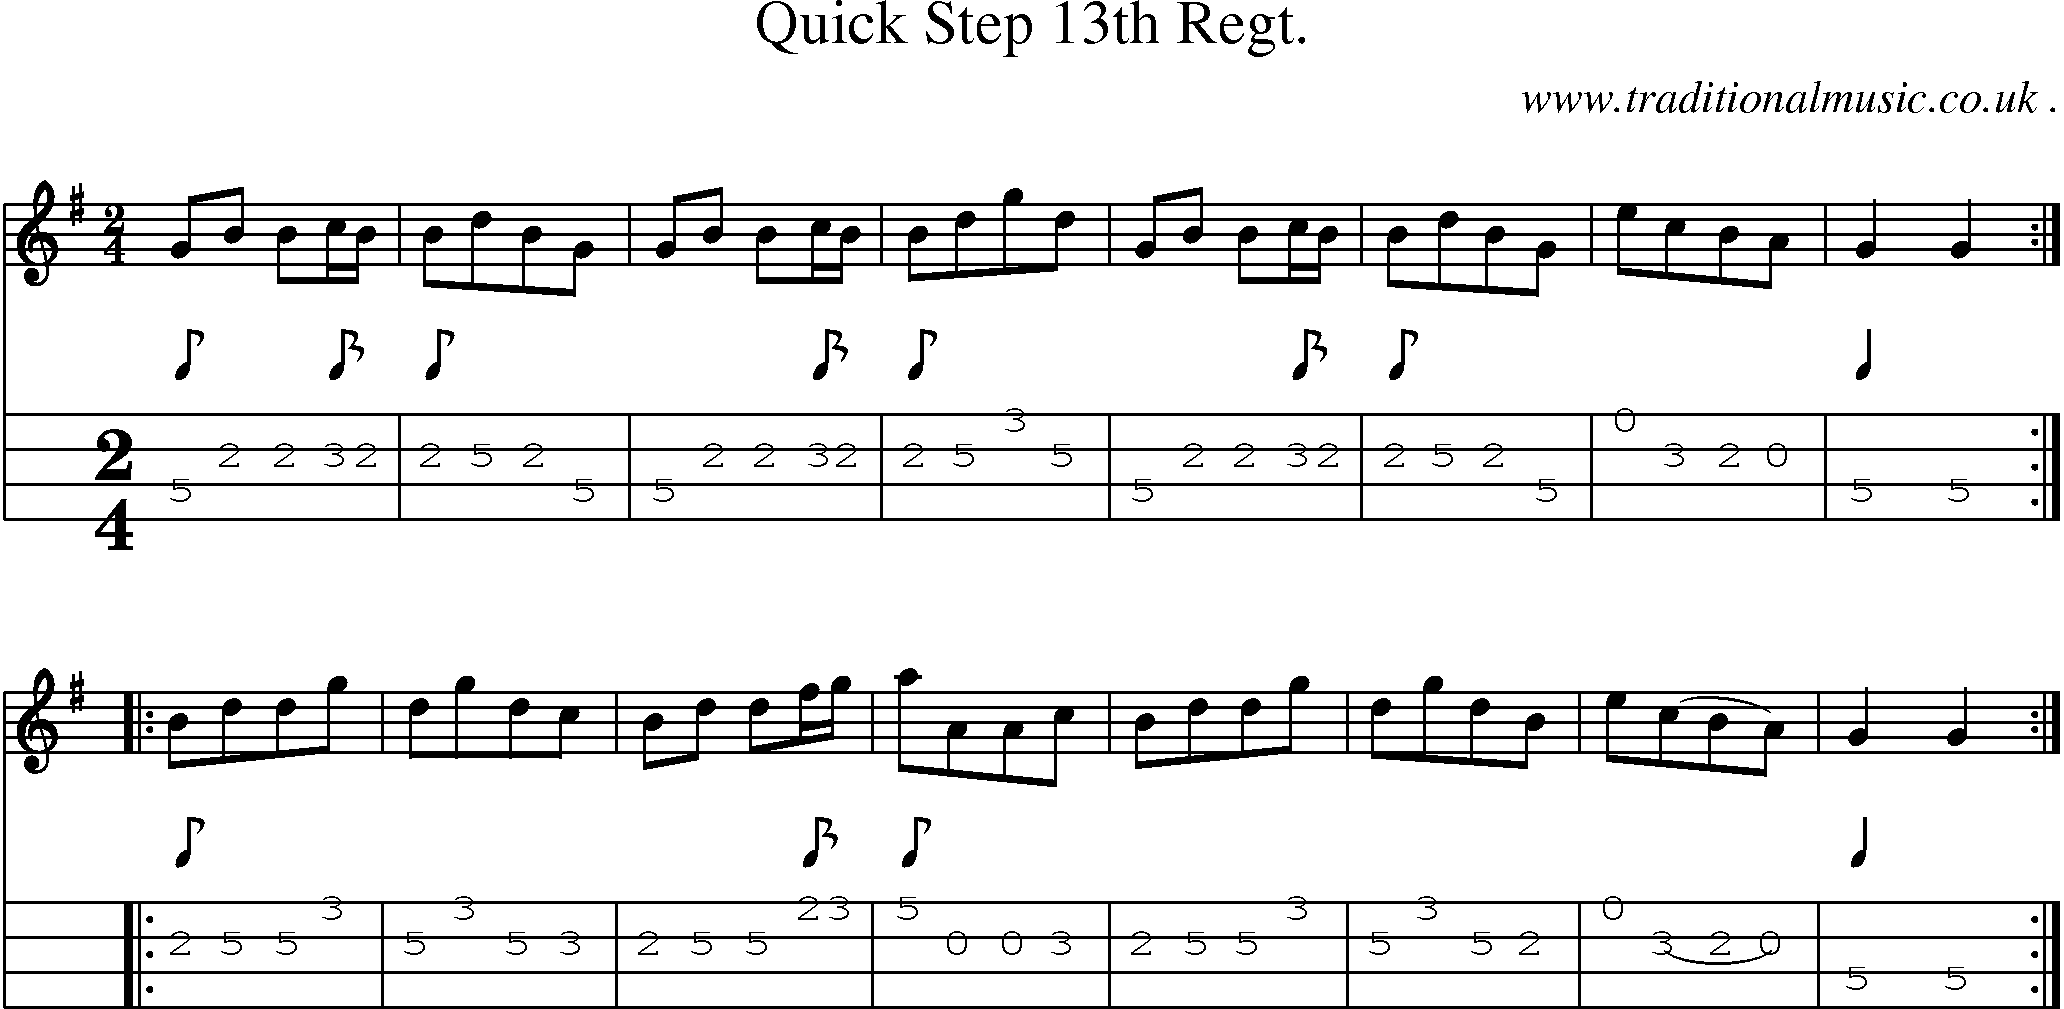 Sheet-music  score, Chords and Mandolin Tabs for Quick Step 13th Regt